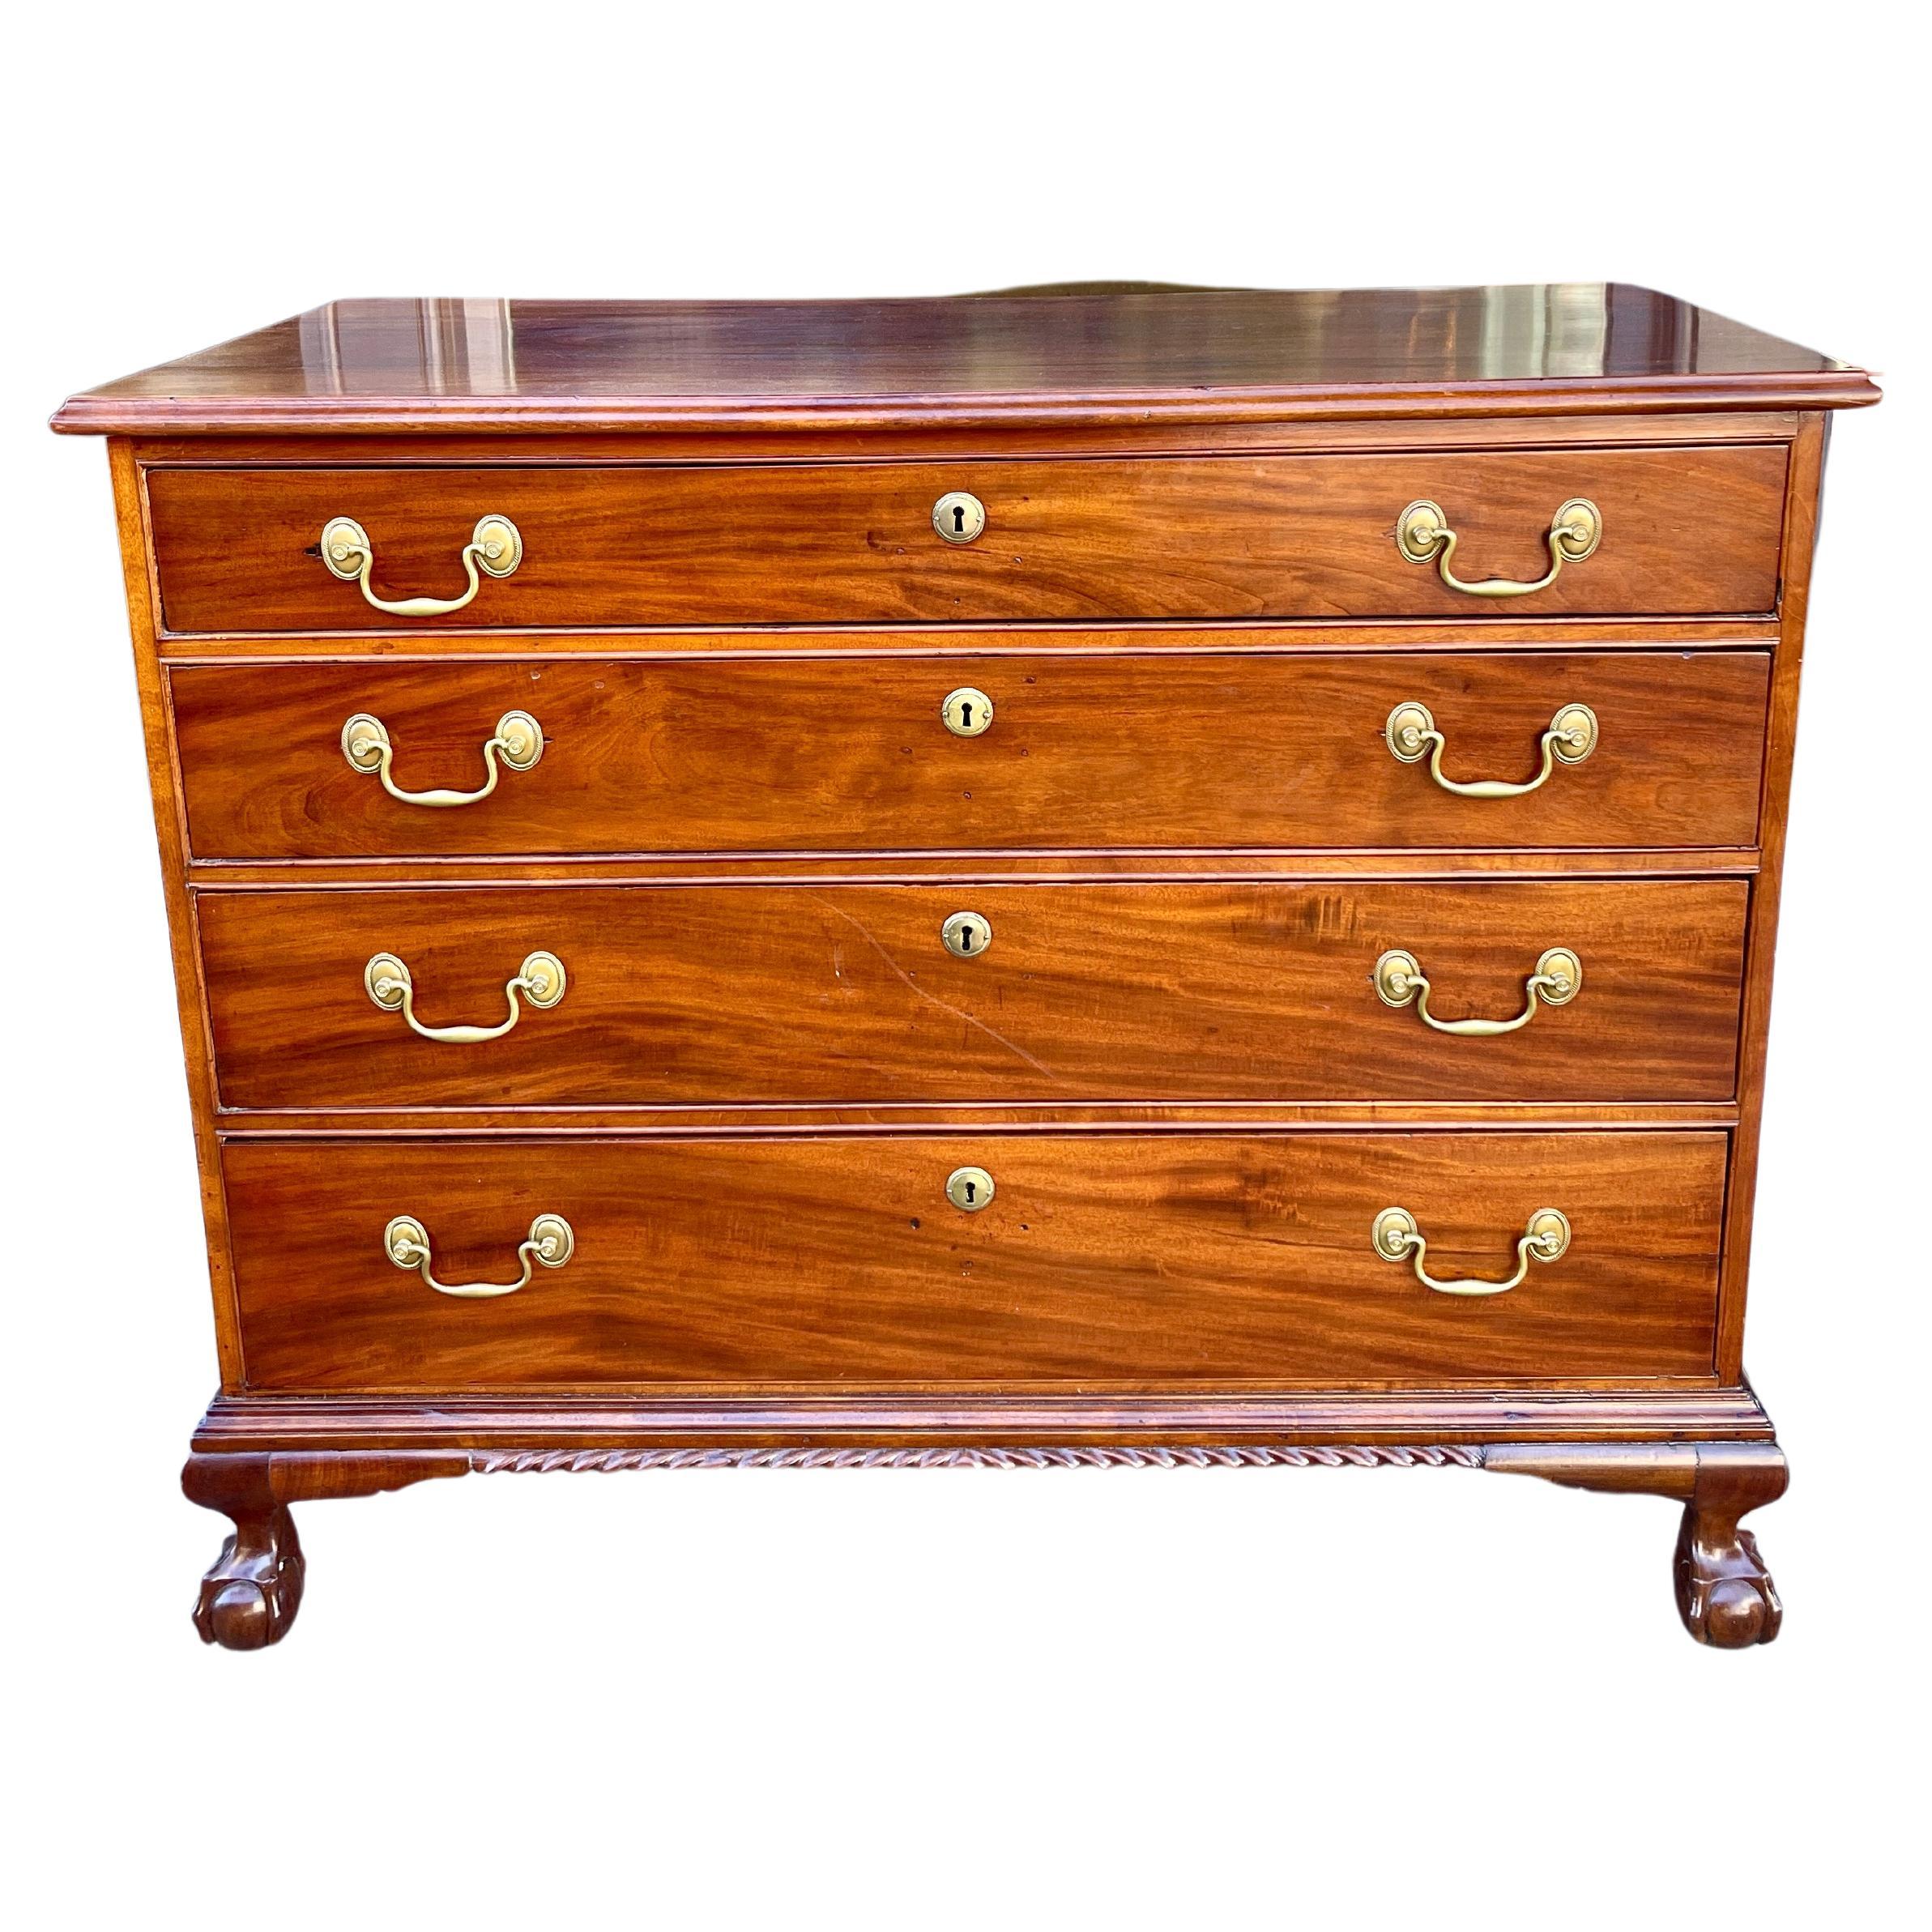 Mahogany chest with ball and claw feet 18th century NY For Sale